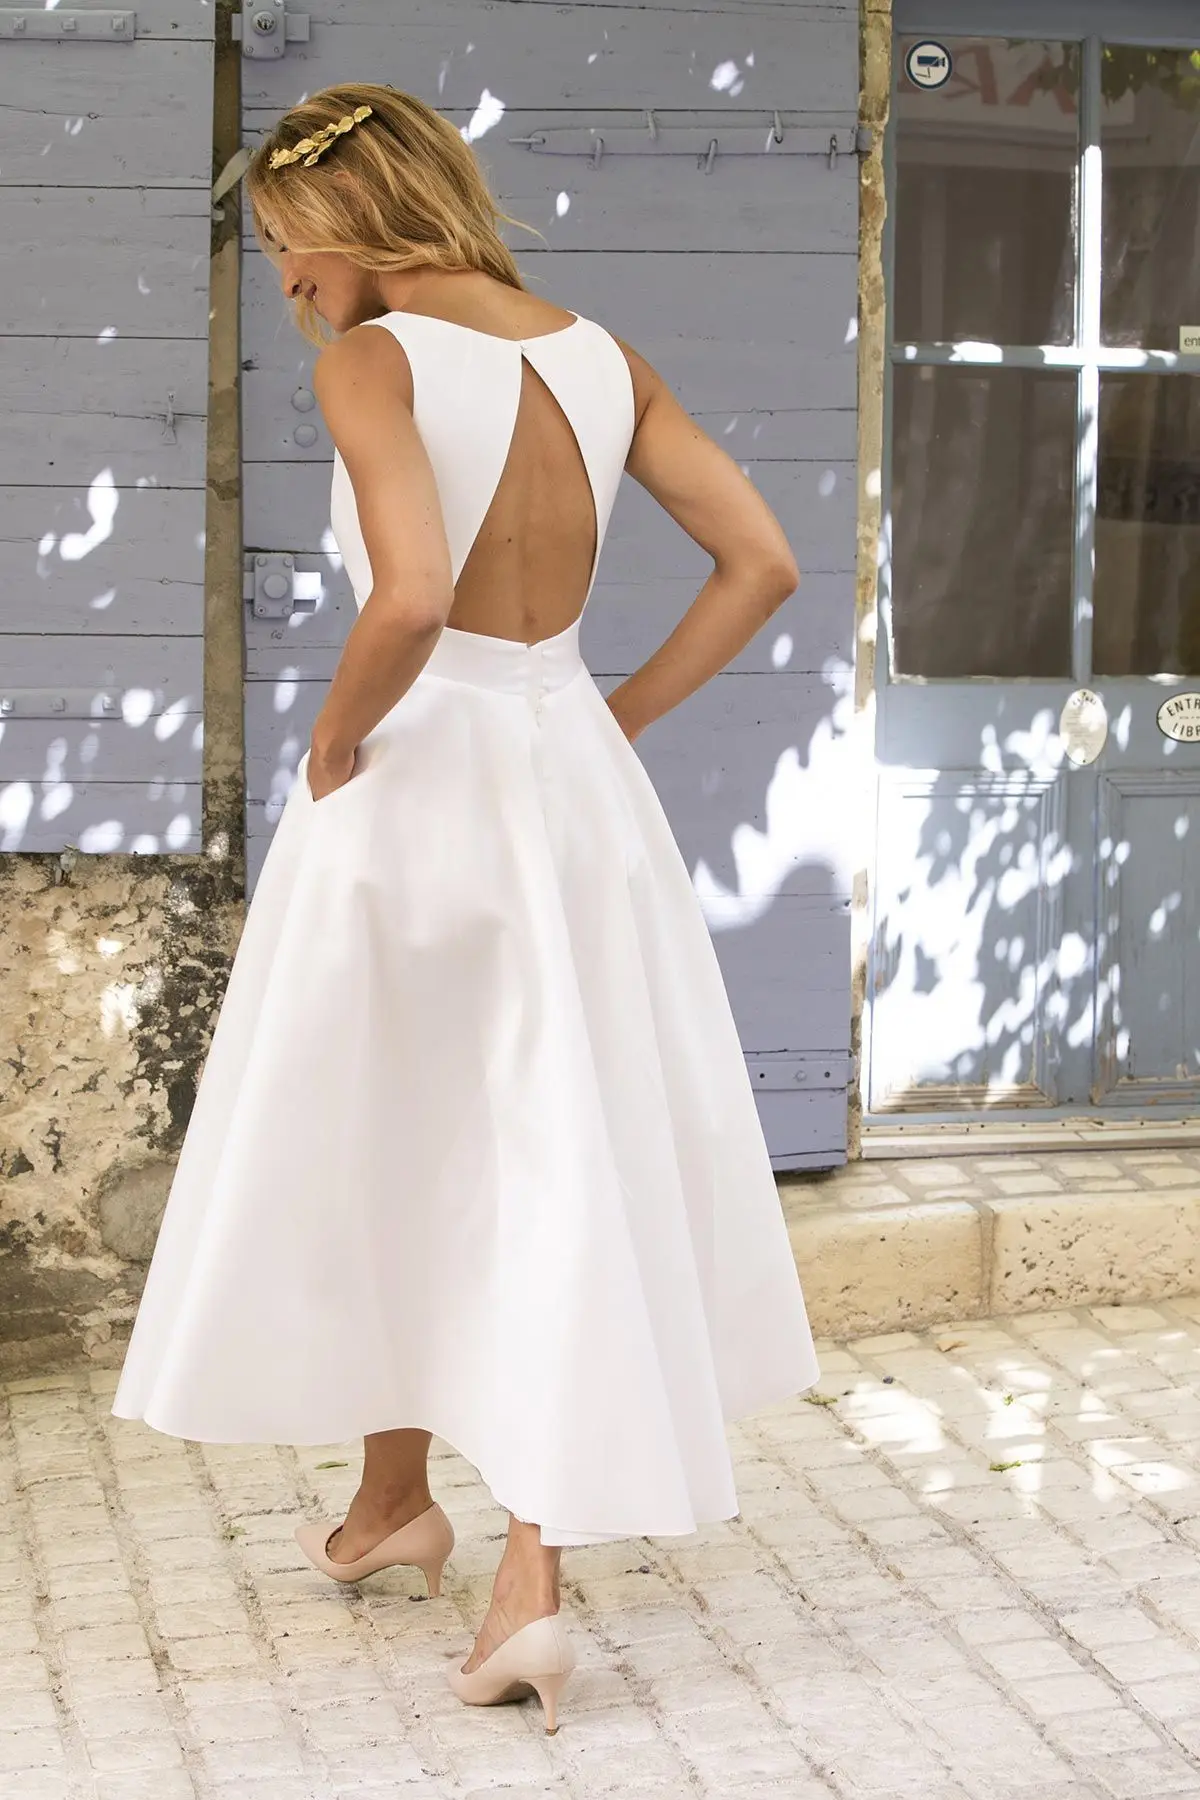 White Party Dresses Women Evening 2022 Spring Sexy  Backless  Office Lady  Undefined  Bridesmaid Dress bridesmaid dresses